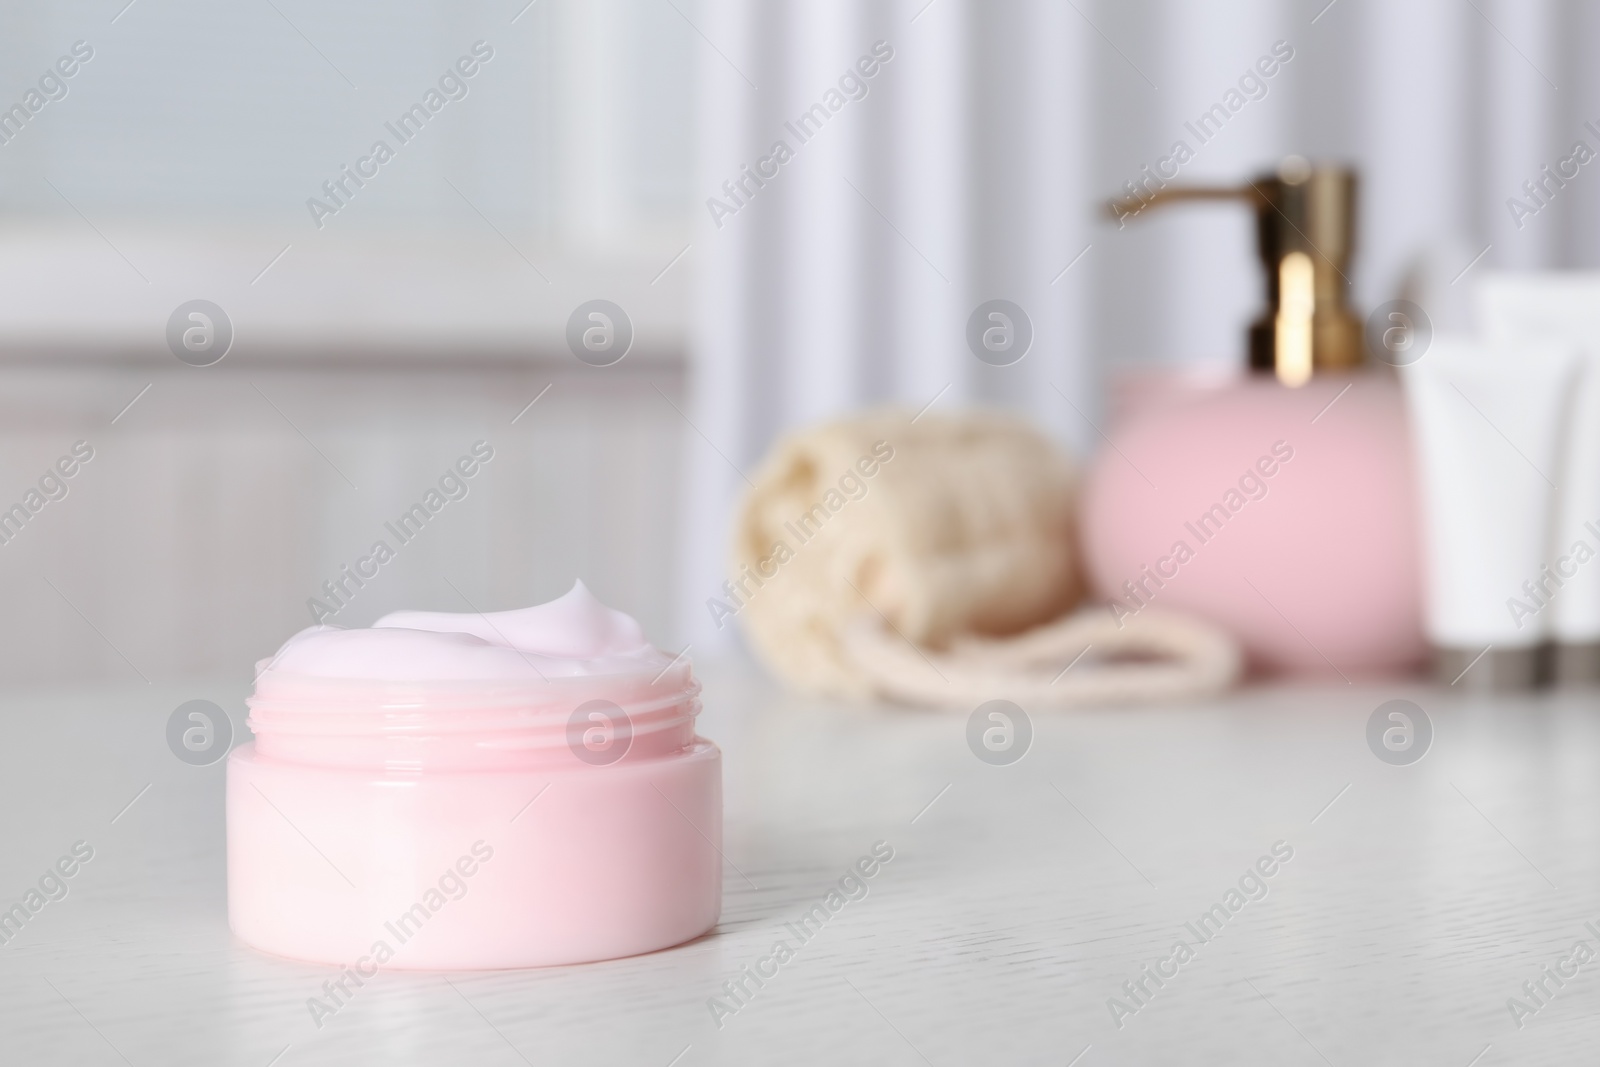 Photo of Jar of body care product on table against blurred background. Space for text